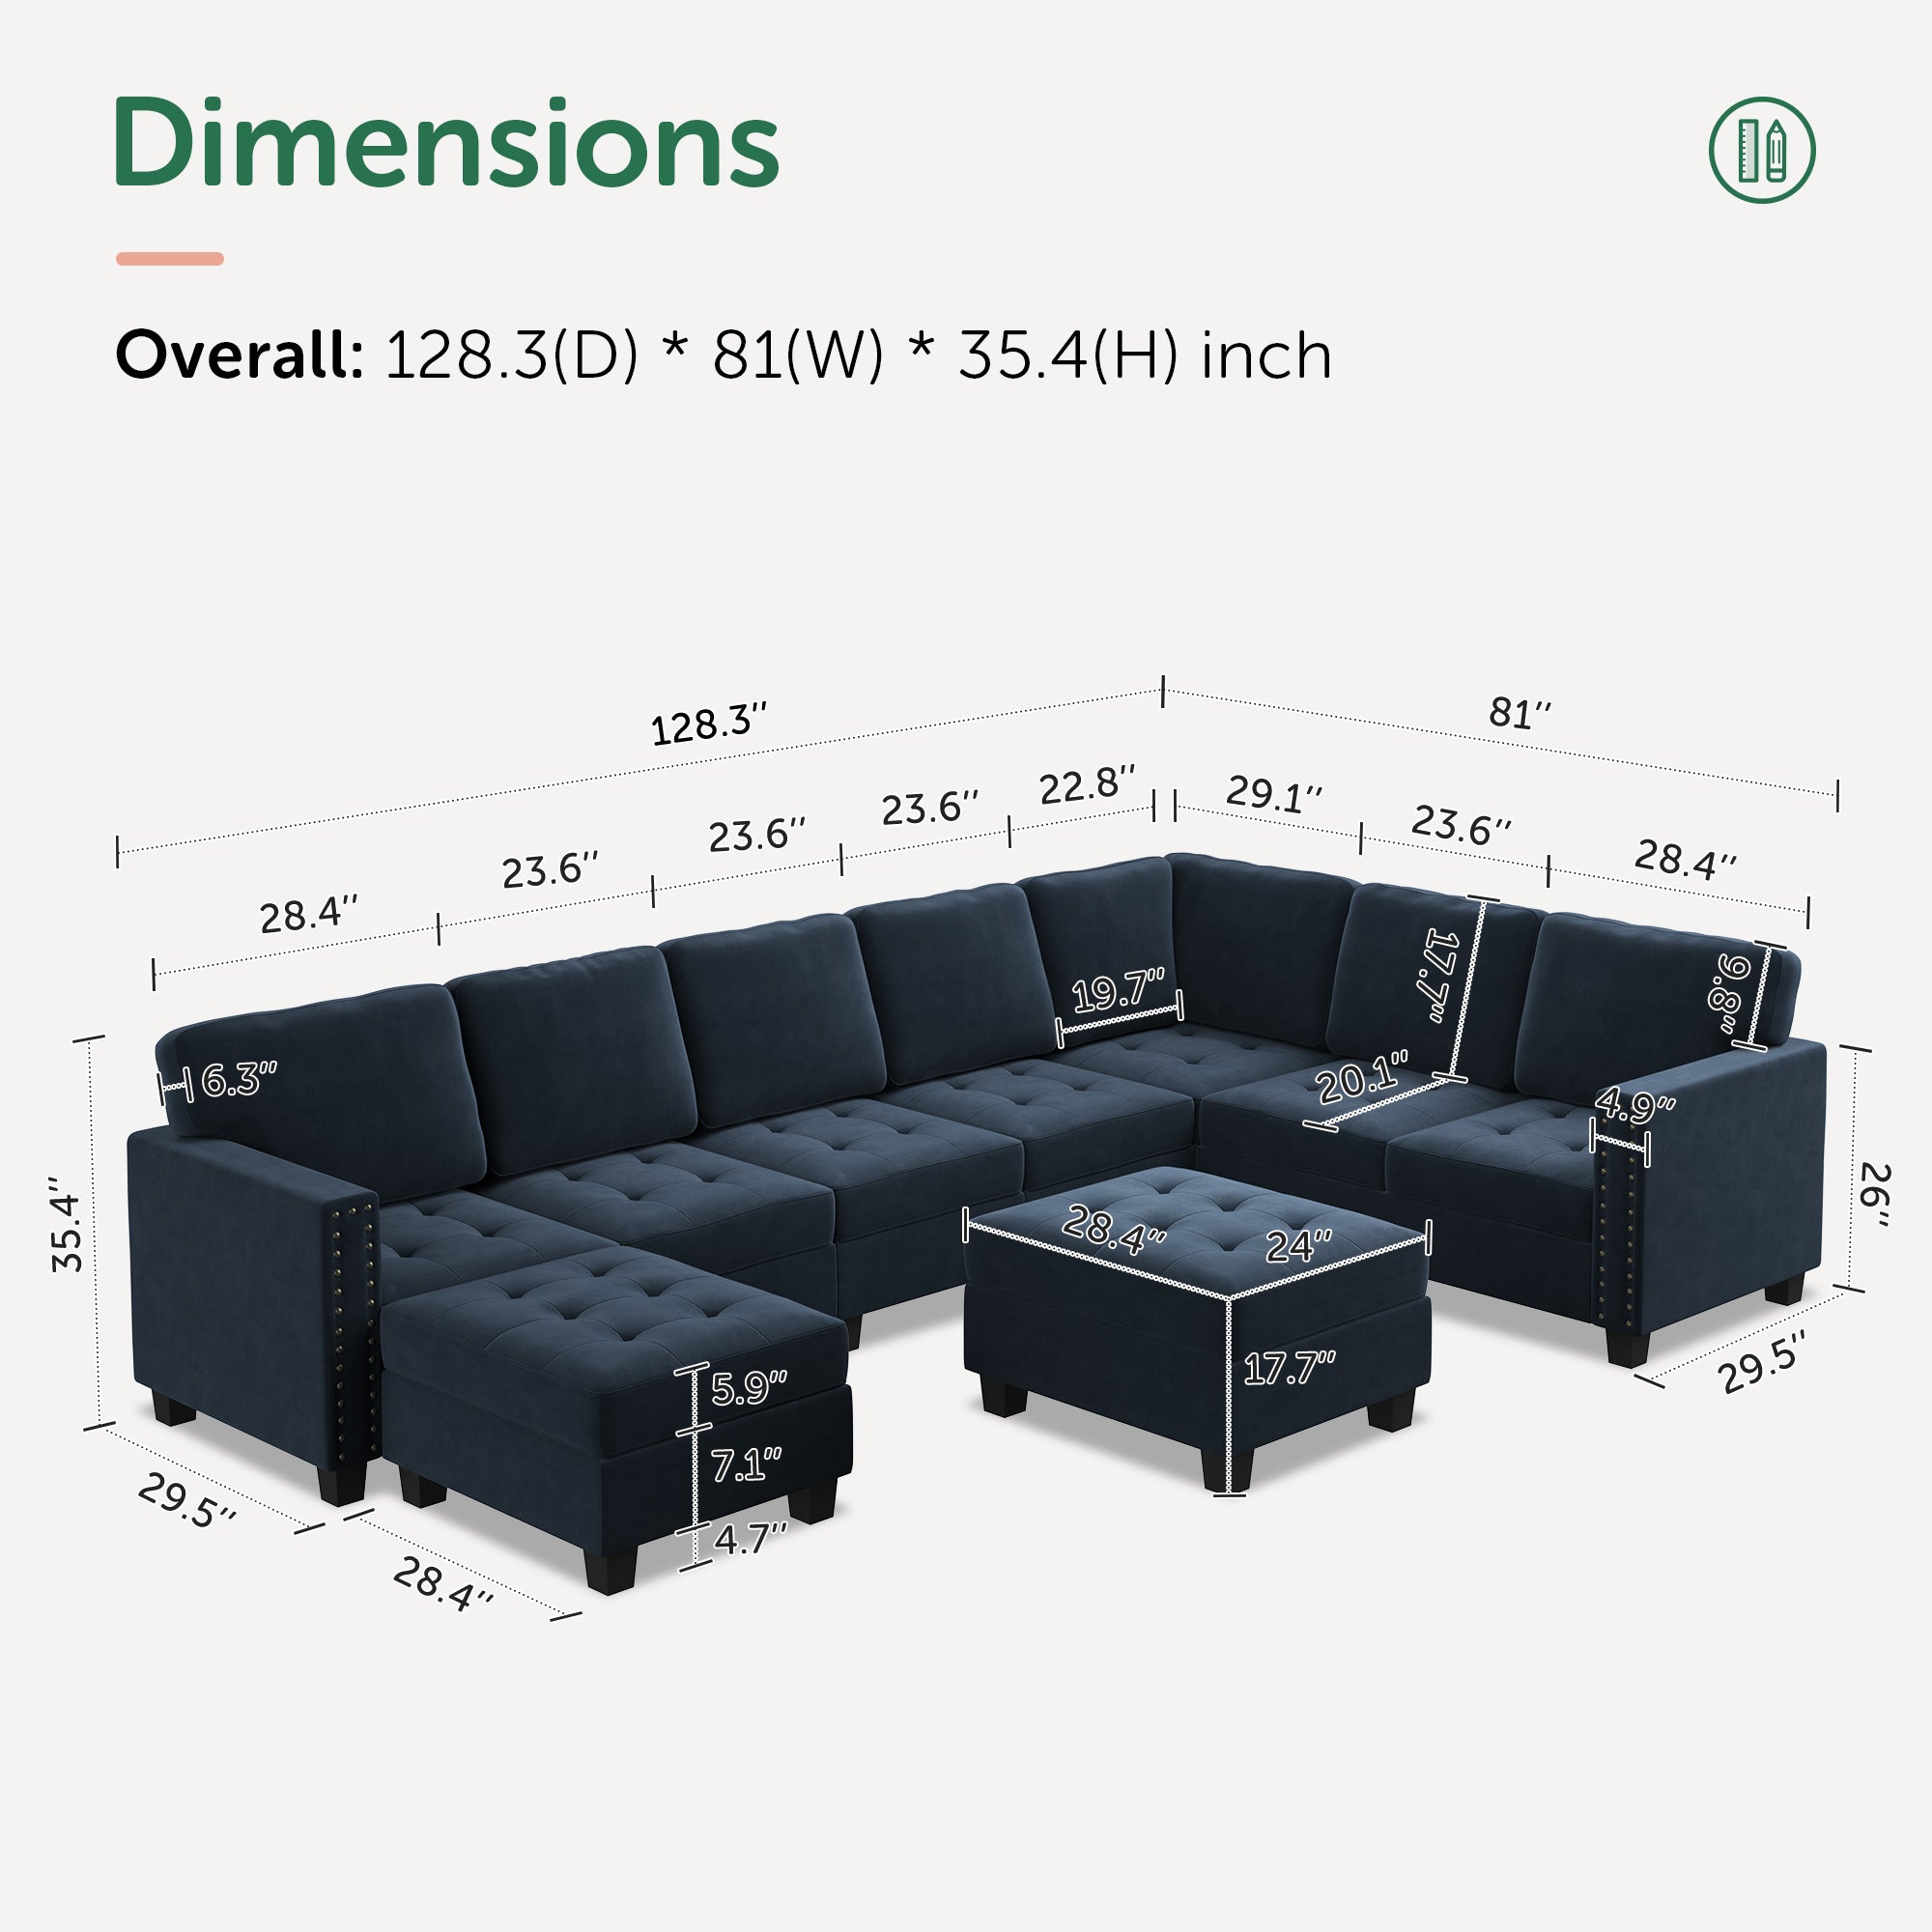 Modular Sectional With Tray Ottoman With Measurements